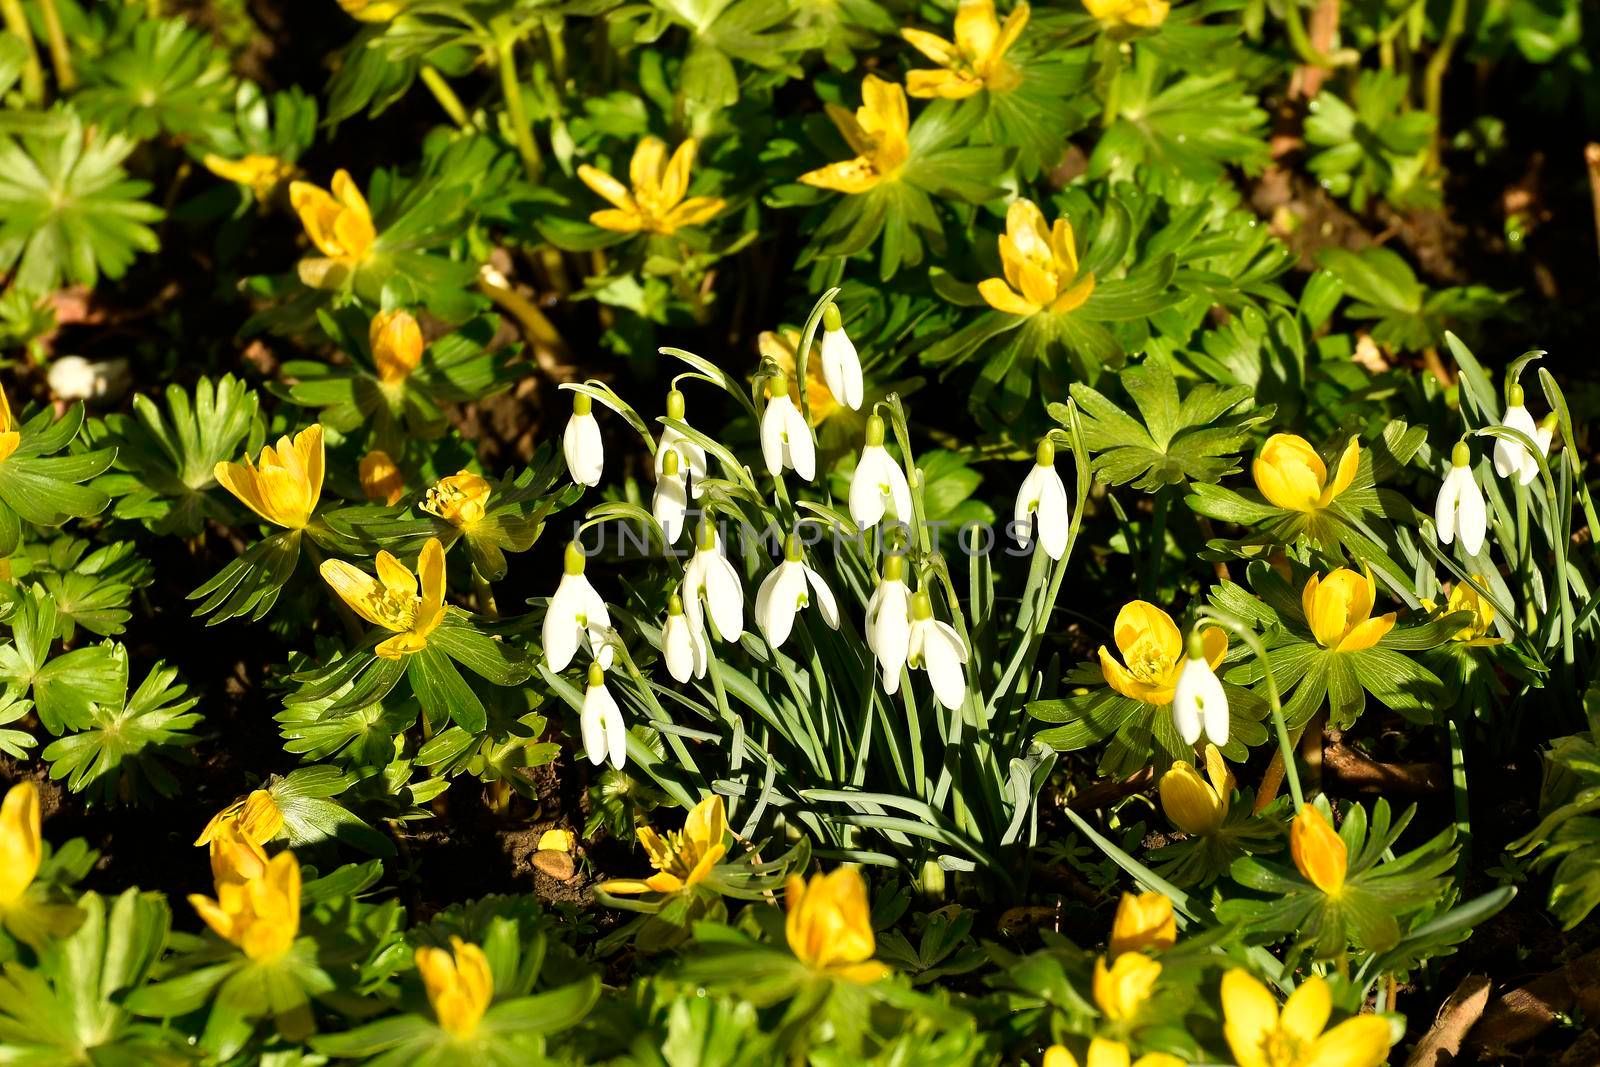 winter aconite and snowdrops in early spring in a German garden by Jochen